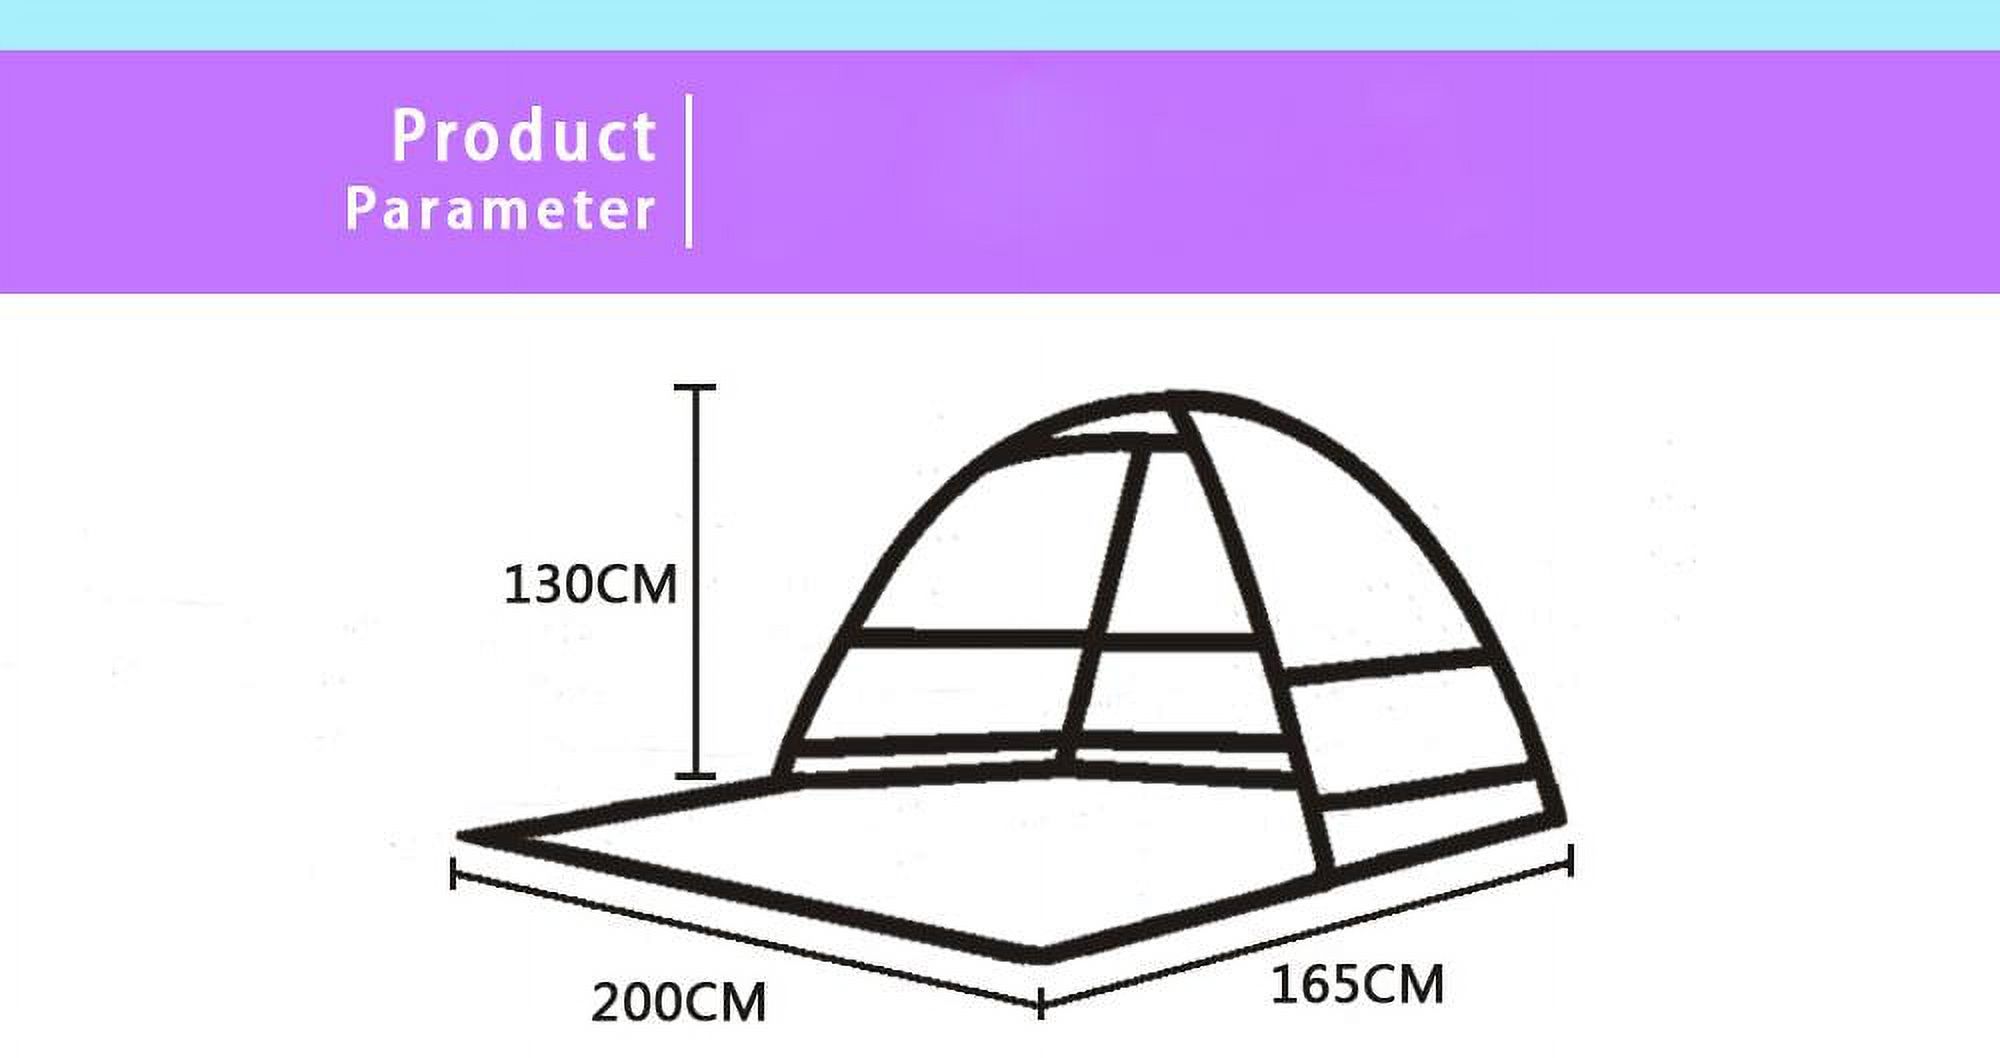 Elegantoss Portable Camping Tent Automatic Pop Up Tent UV Resistant - image 5 of 6